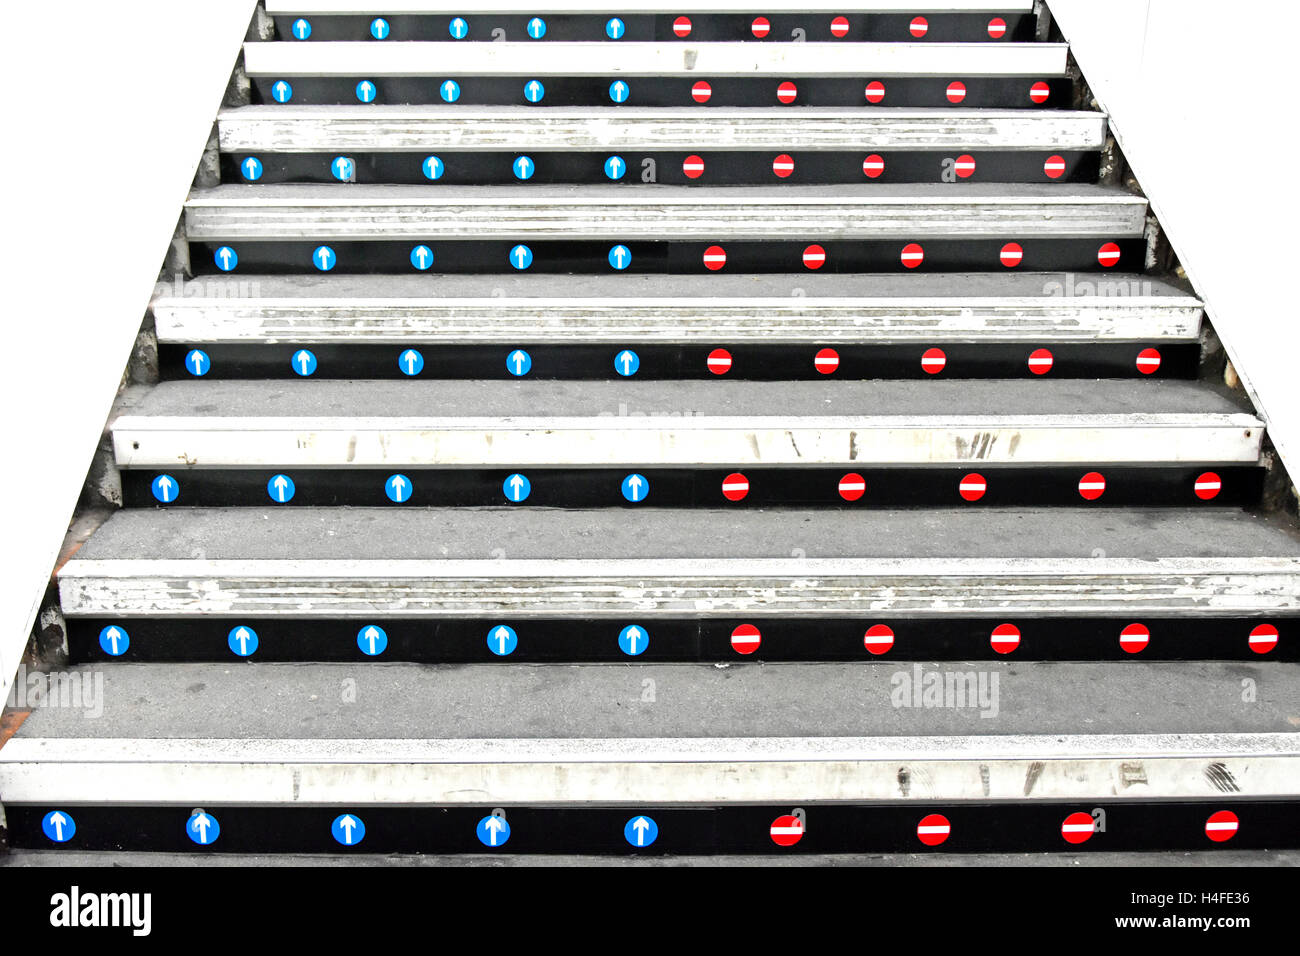 No entry stickers on stair risers of uk railway station platform staircase to indicate correct up & down access those coming down see nothing Stock Photo